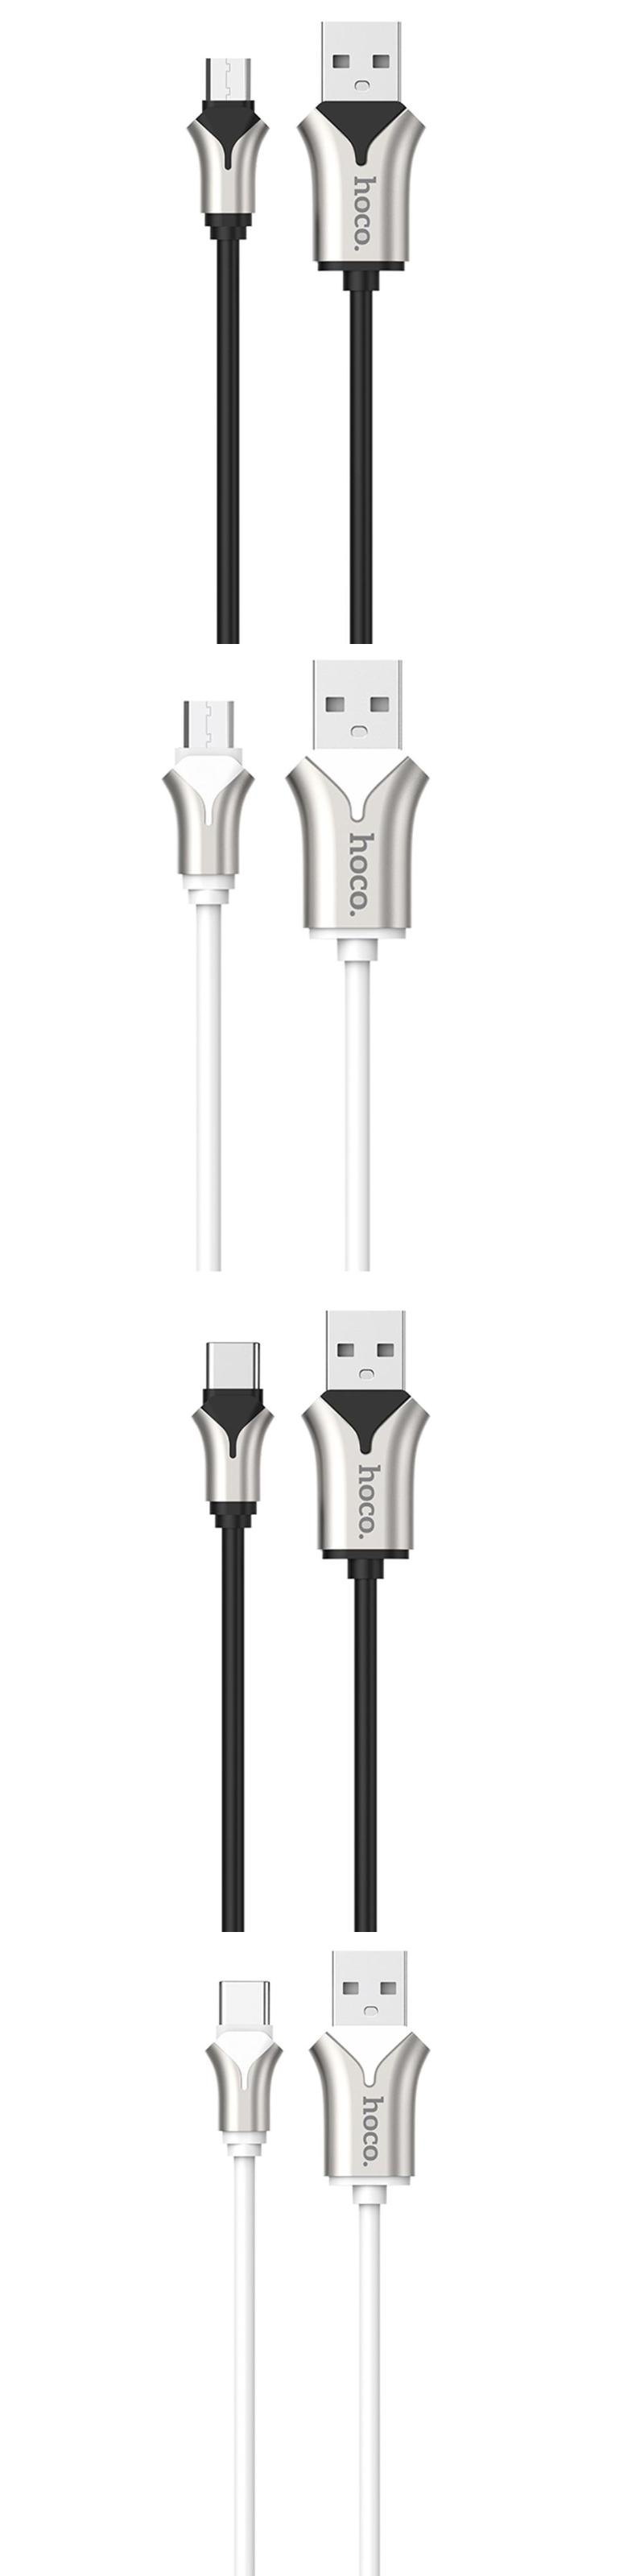 HOCO-3A-Micro-USB-Type-C-Fast-Charging-Data-Cable-For-MI9-Pocophone-F1-HUAWEI-VIVO-OPPO-Oneplus-7-S1-1553618